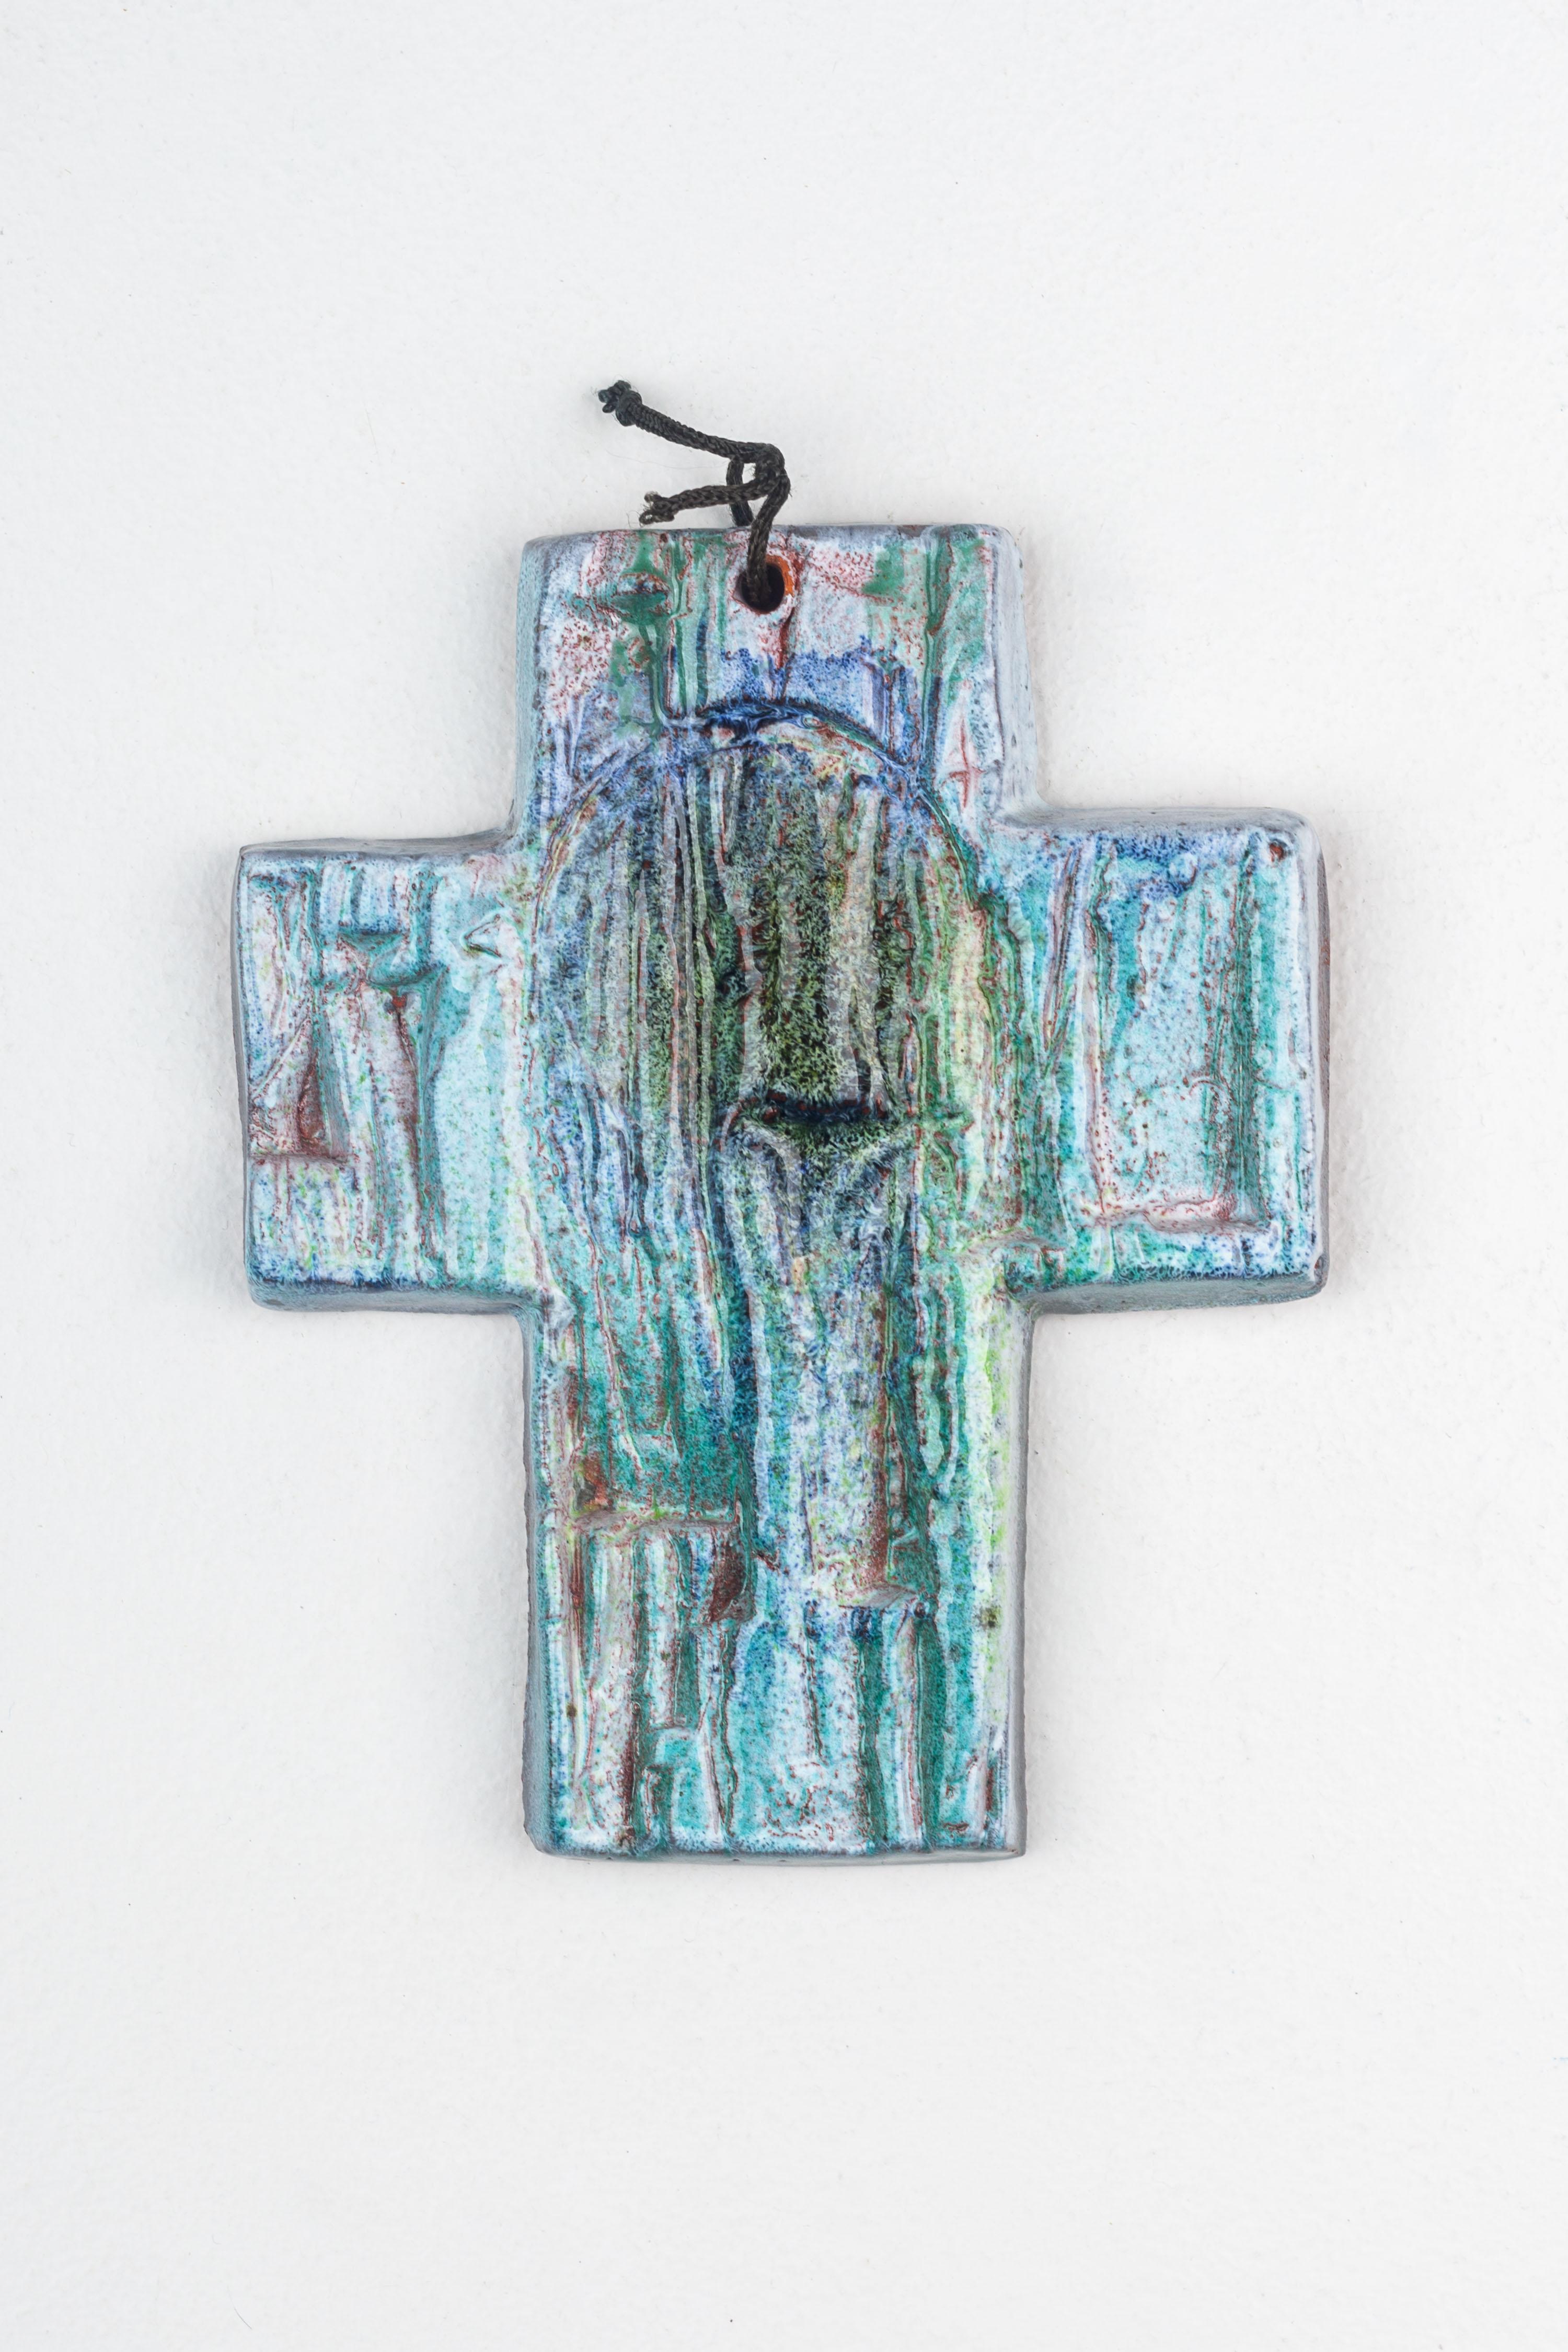 This mid-century modern ceramic cross is an exemplary piece of European studio pottery that displays the innovative and abstract artistry of the period. The piece is characterized by its textured glaze, which creates an almost ethereal landscape